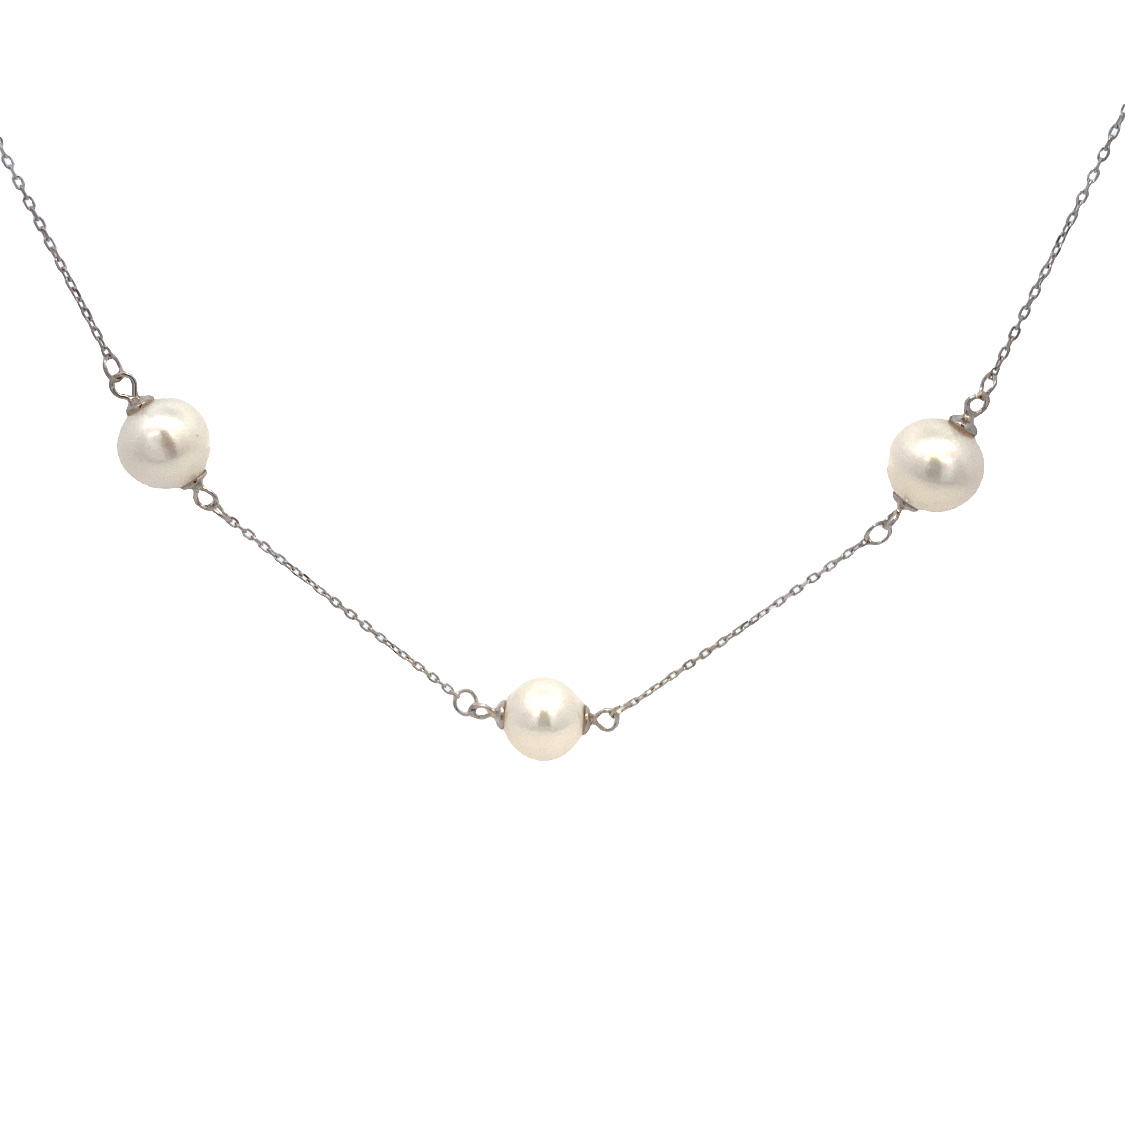 Sterling Silver Pearl Necklace Having 11 White Freshwater Pearl Stations Measuring 24.5" Adjustable to 22.5.